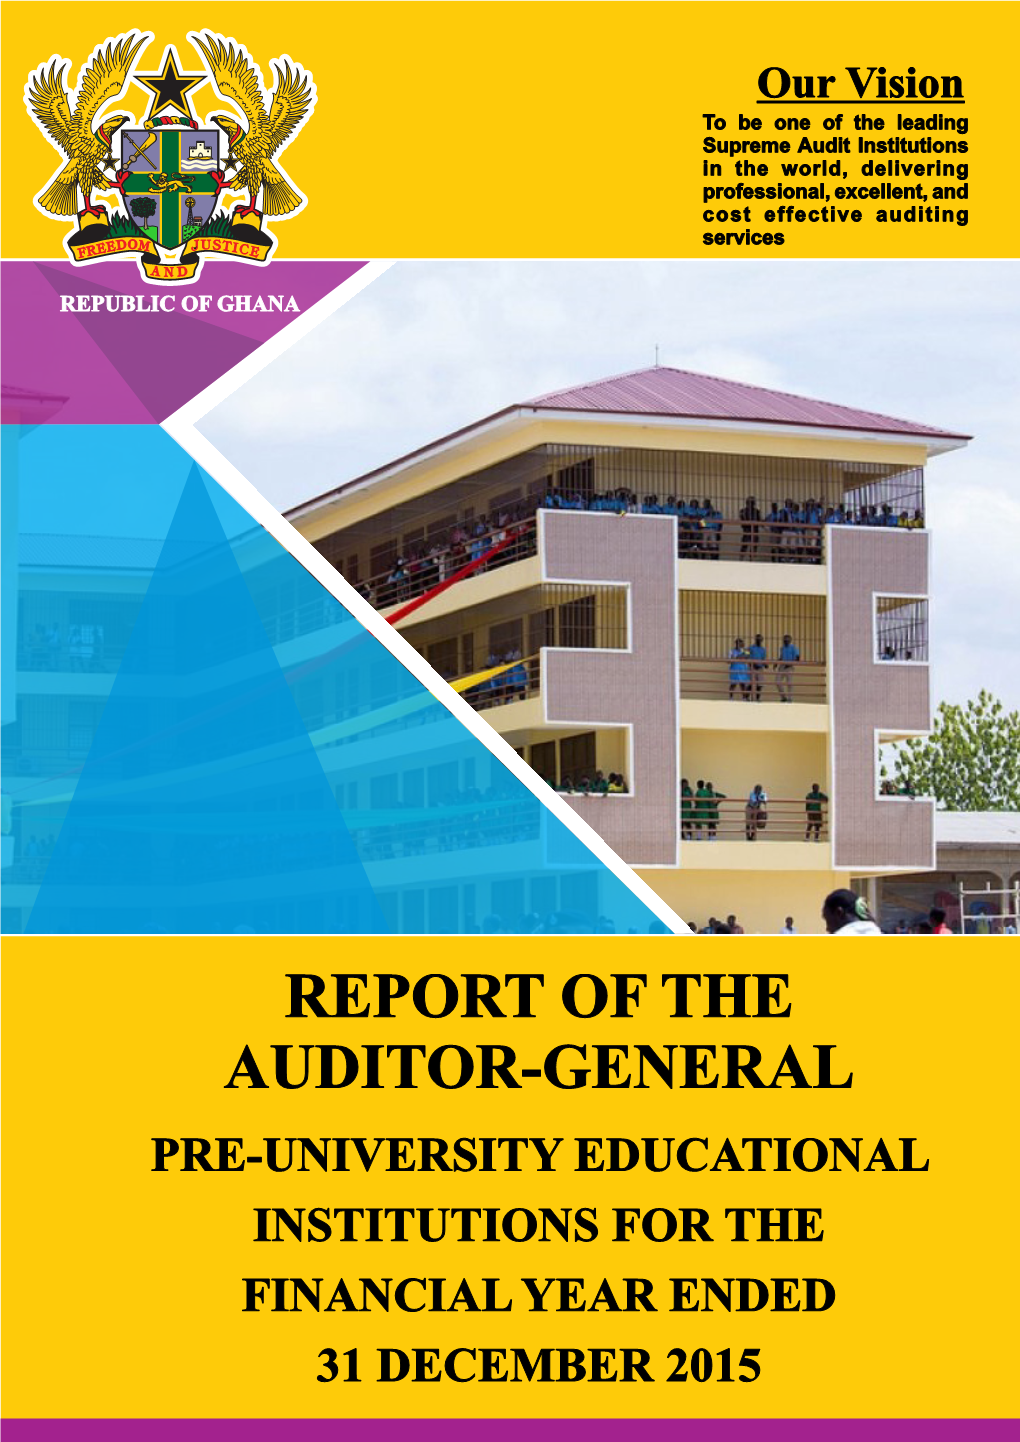 Report of the Auditor-General on the Public Accounts of Ghana, Pre-University Educational Institutions for the Financial Year Ended 31 December 2015